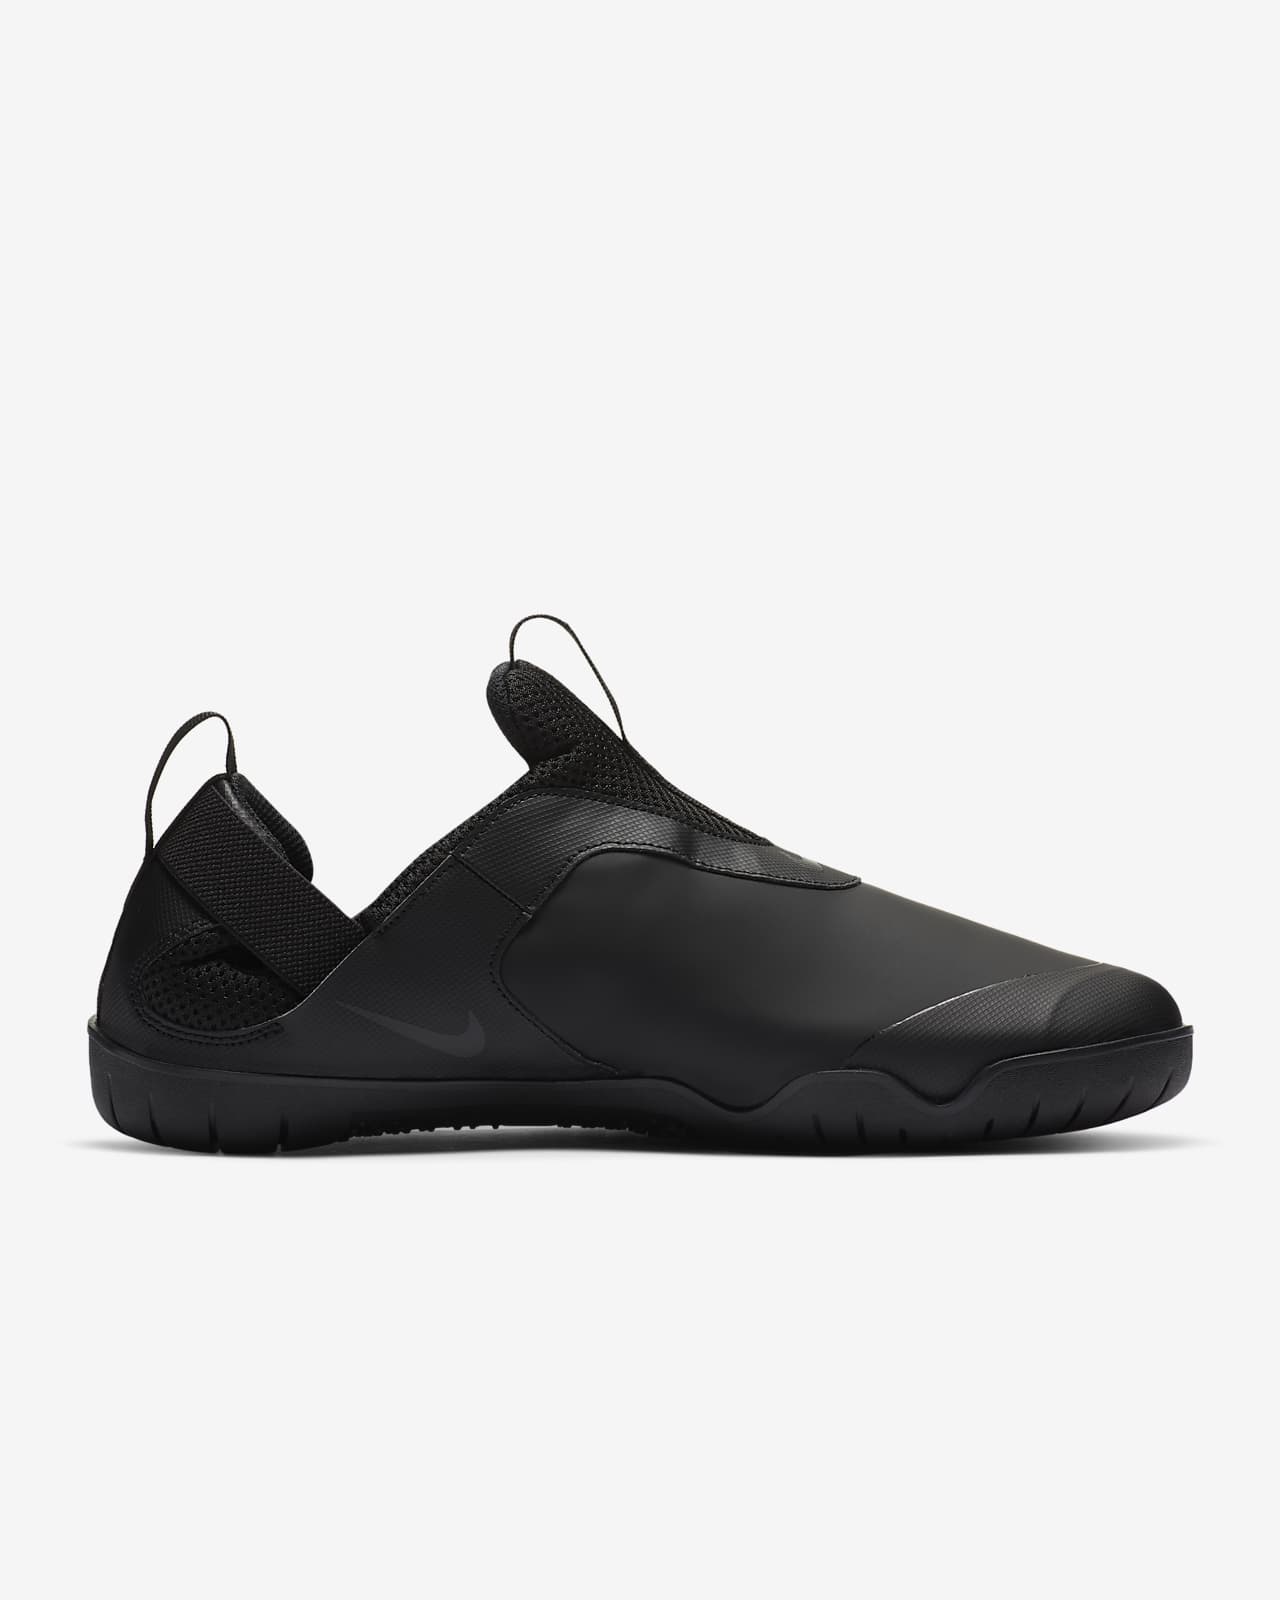 nike pulse shoes for nurses price